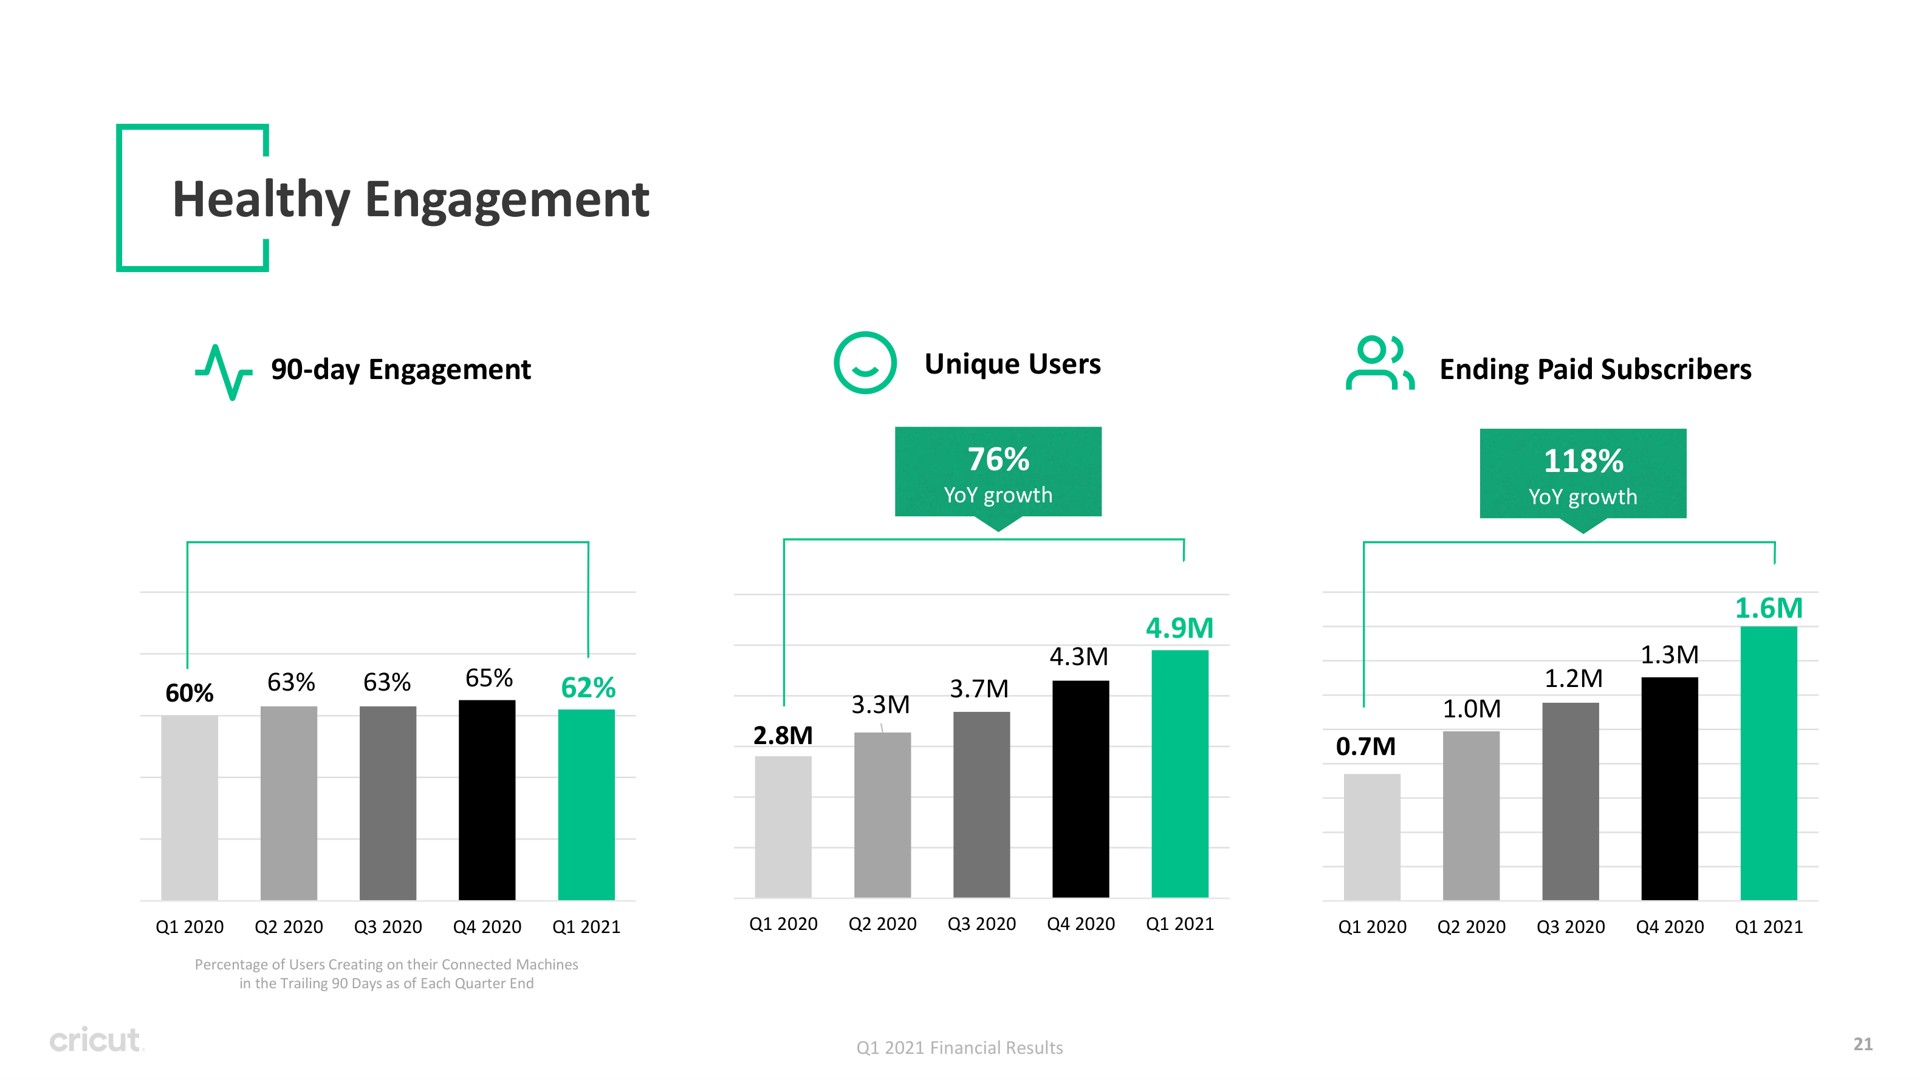 healthy engagement a day pole ending paid subscribers no mice yoy growth an percentage of users creating on their connected machines in the trailing days as of each quarter end | Circut